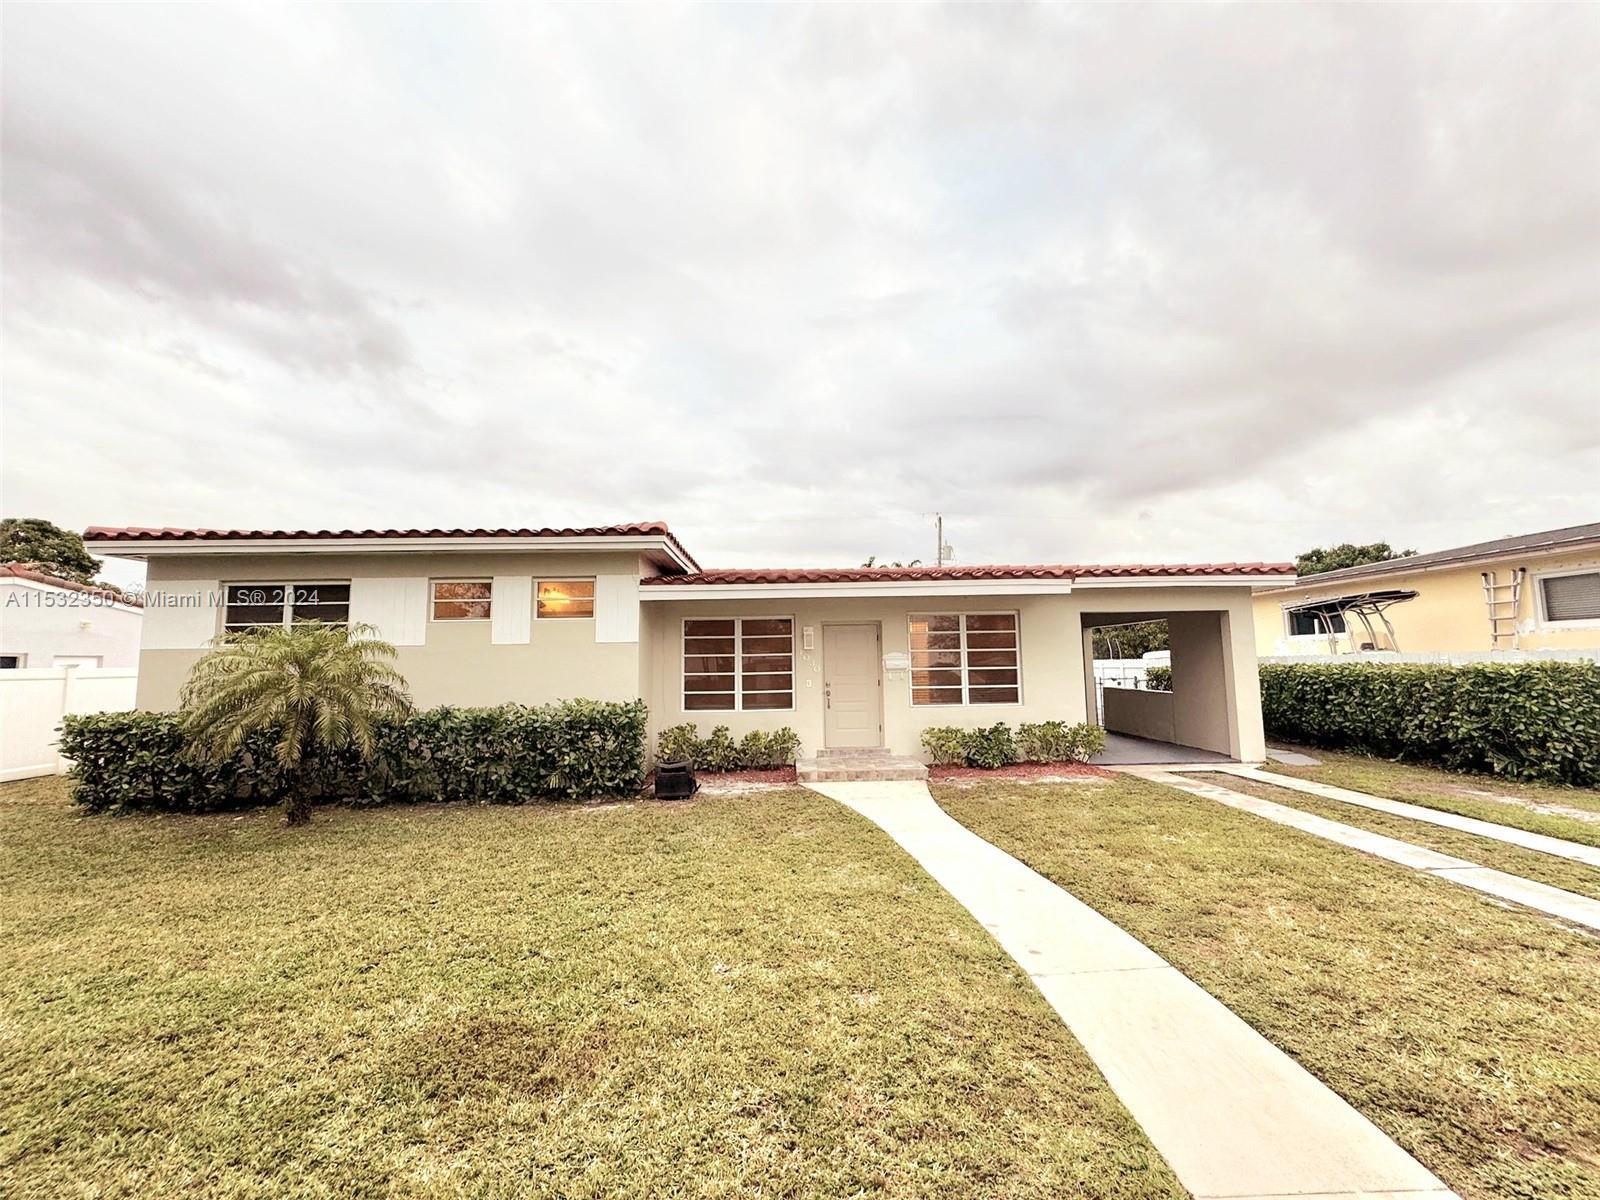 Photo of 1030 Nightingale Ave in Miami Springs, FL